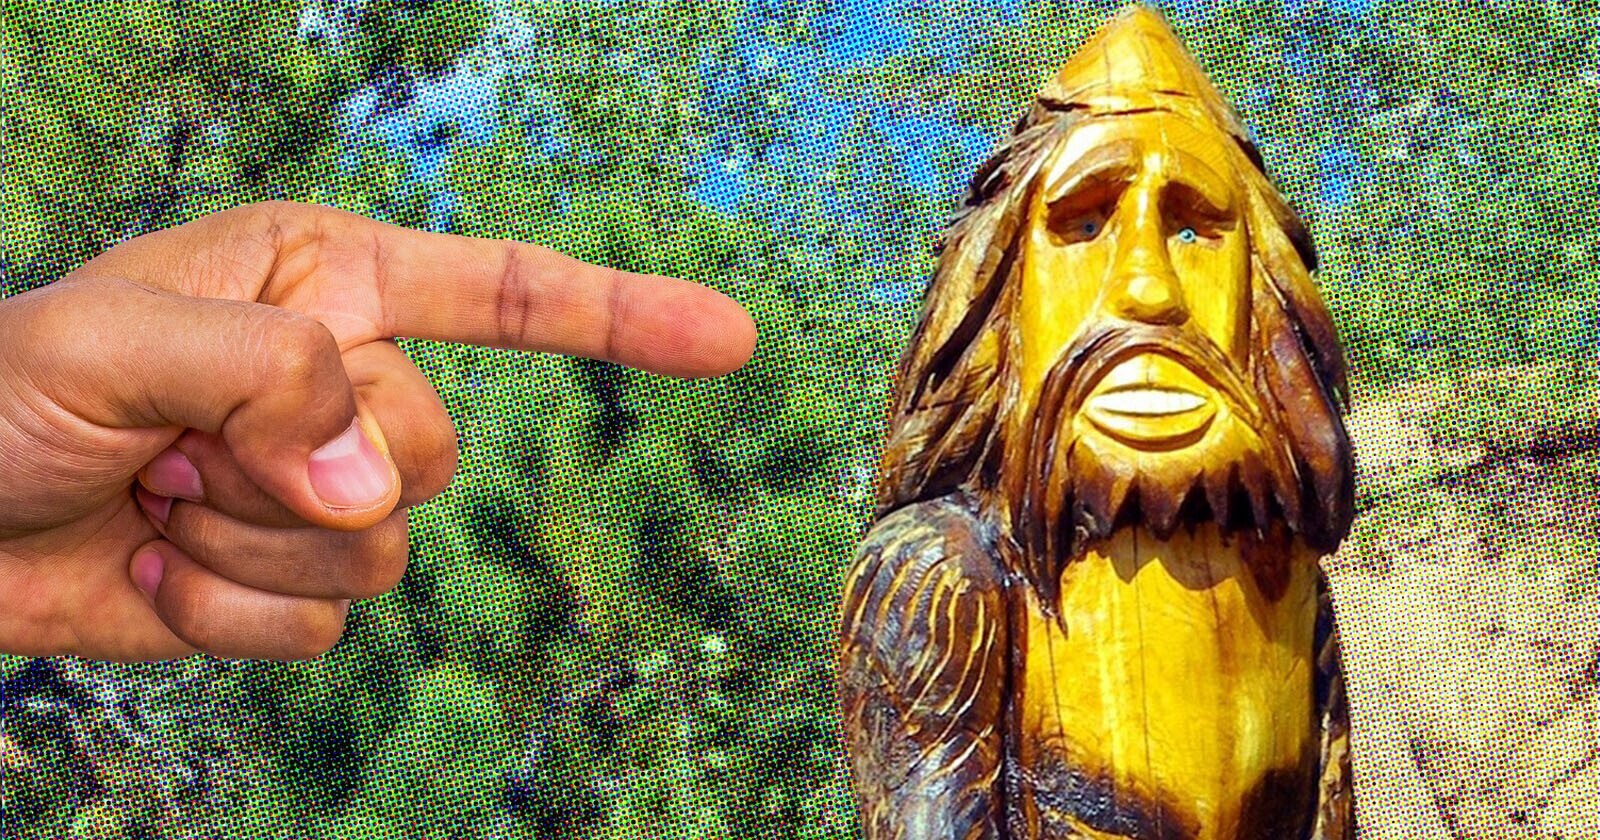 The 5 Most Ridiculous Things Blamed on Bigfoot